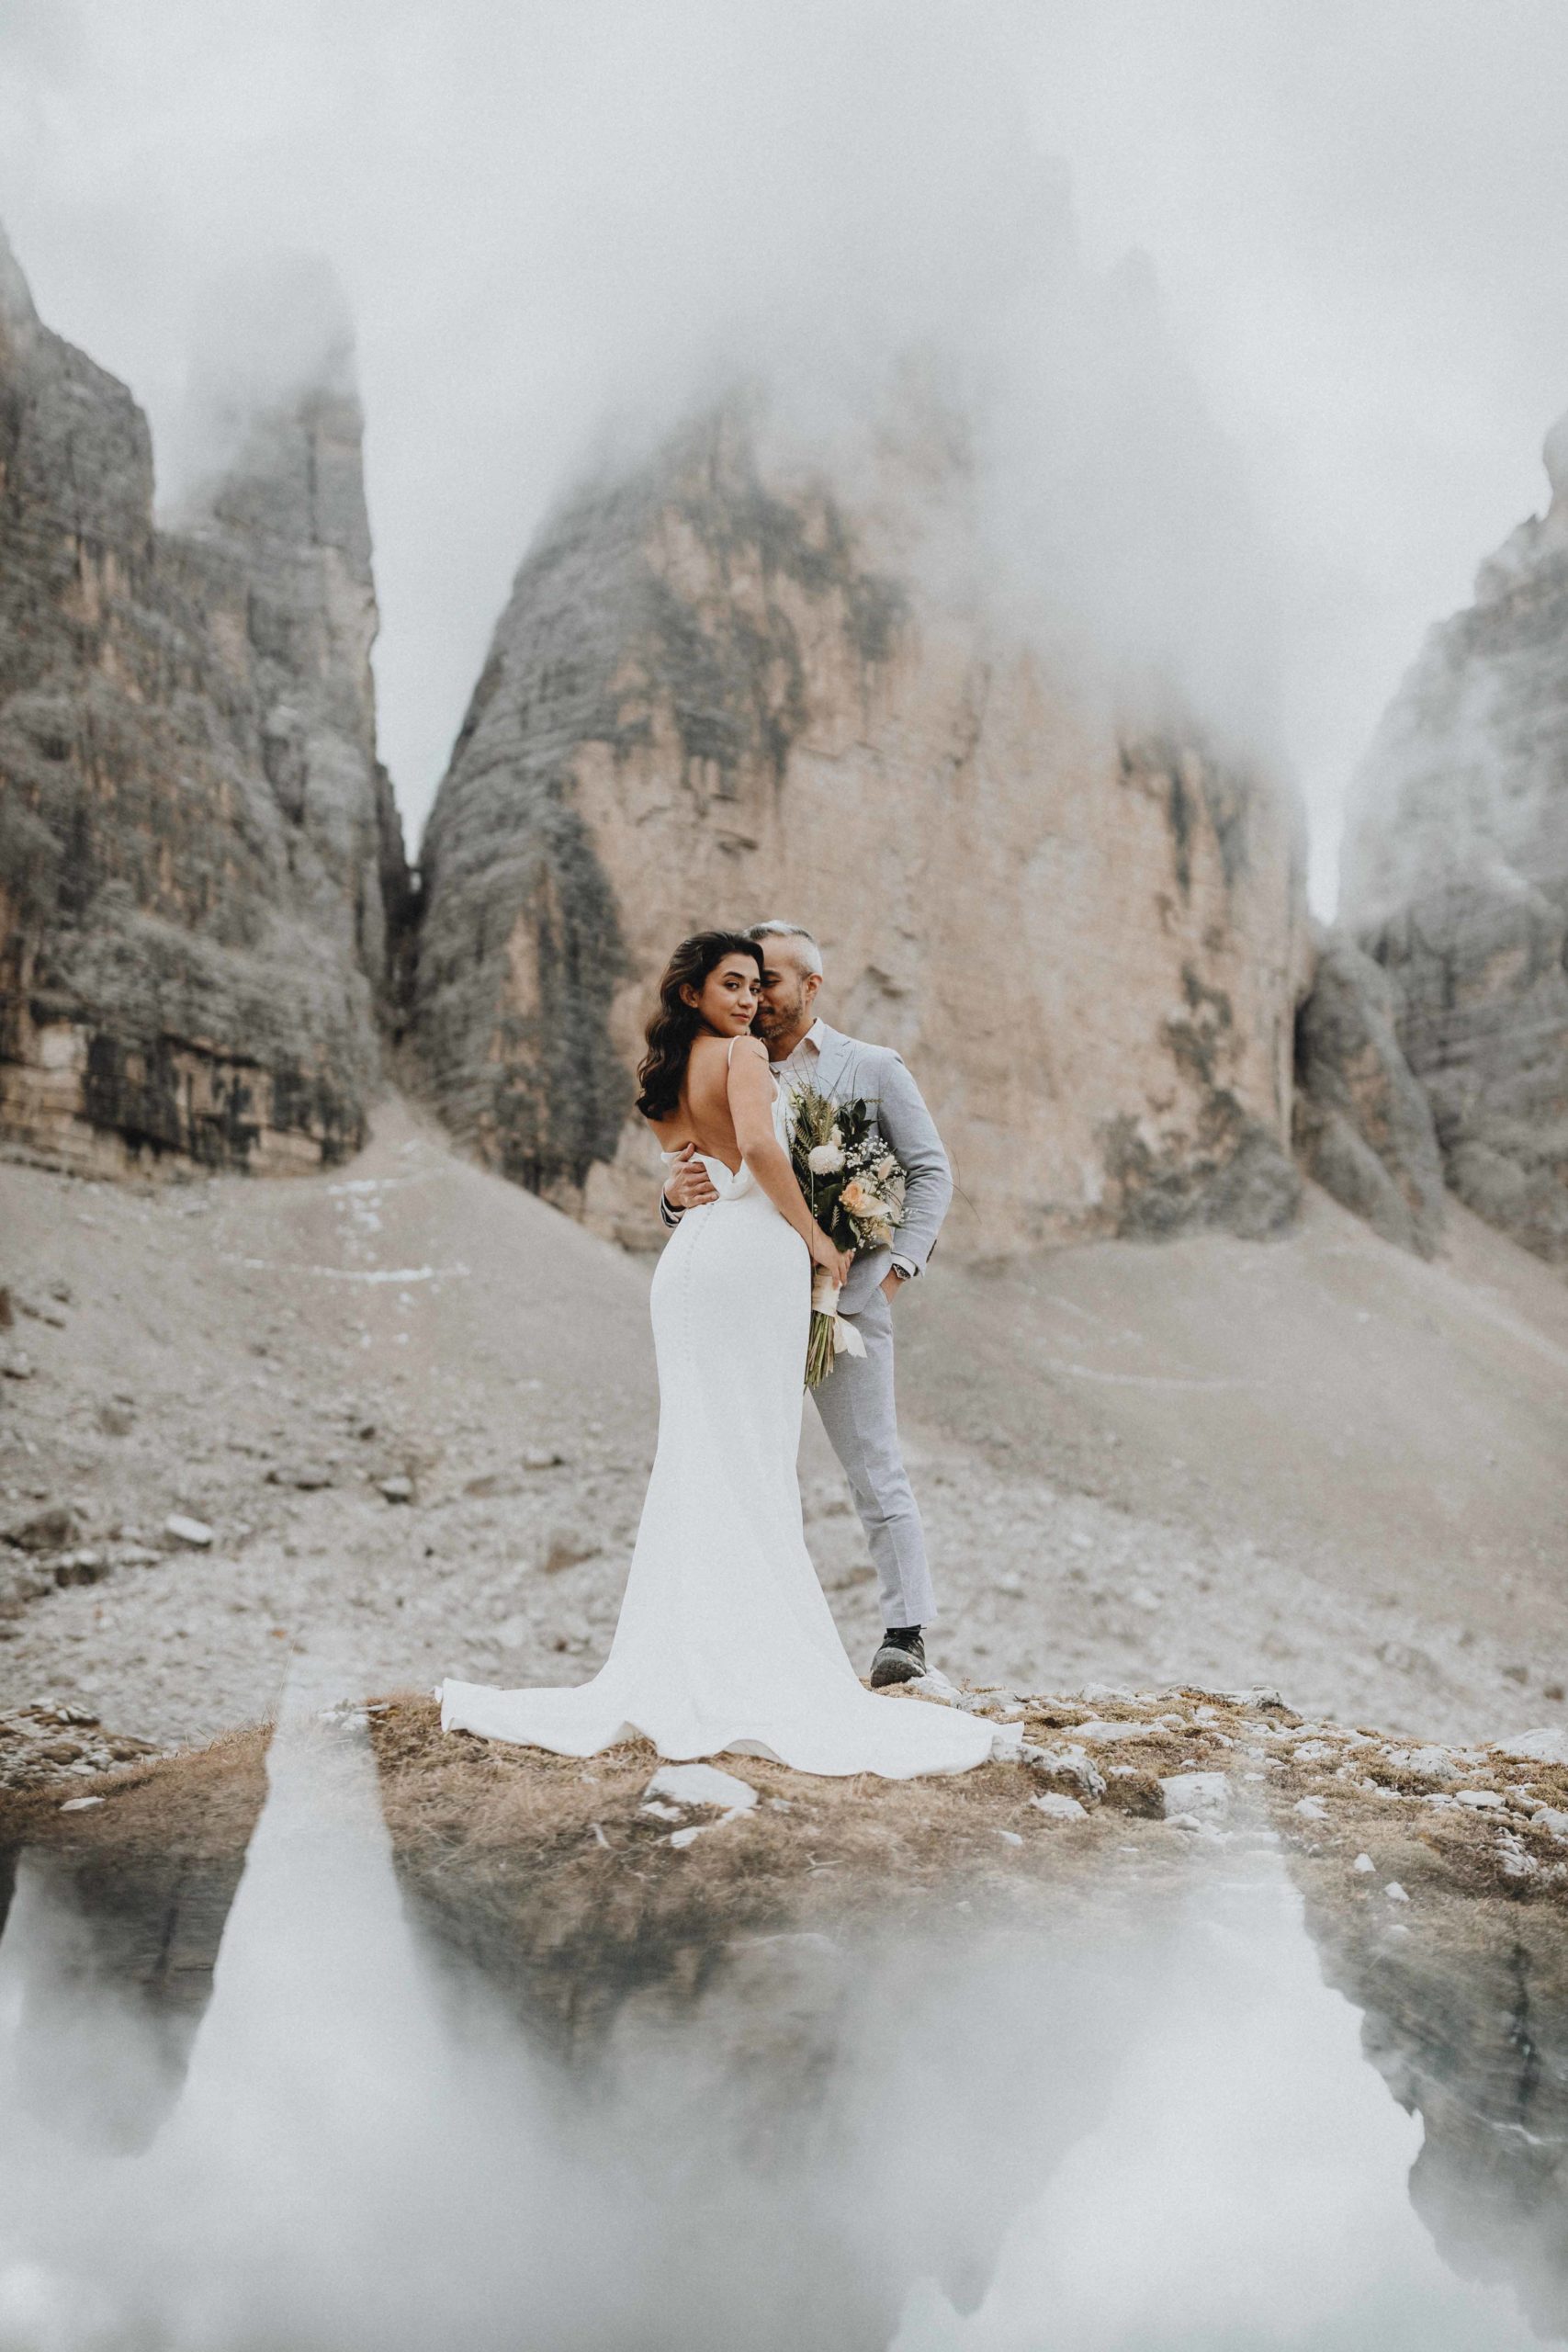 A couple stands cheek to cheek  in their wedding attire next to the Tre Cime peaks during their Dolomites hiking elopement. They peaks are covered in mist, and the woman is looking back at the camera dramatically.